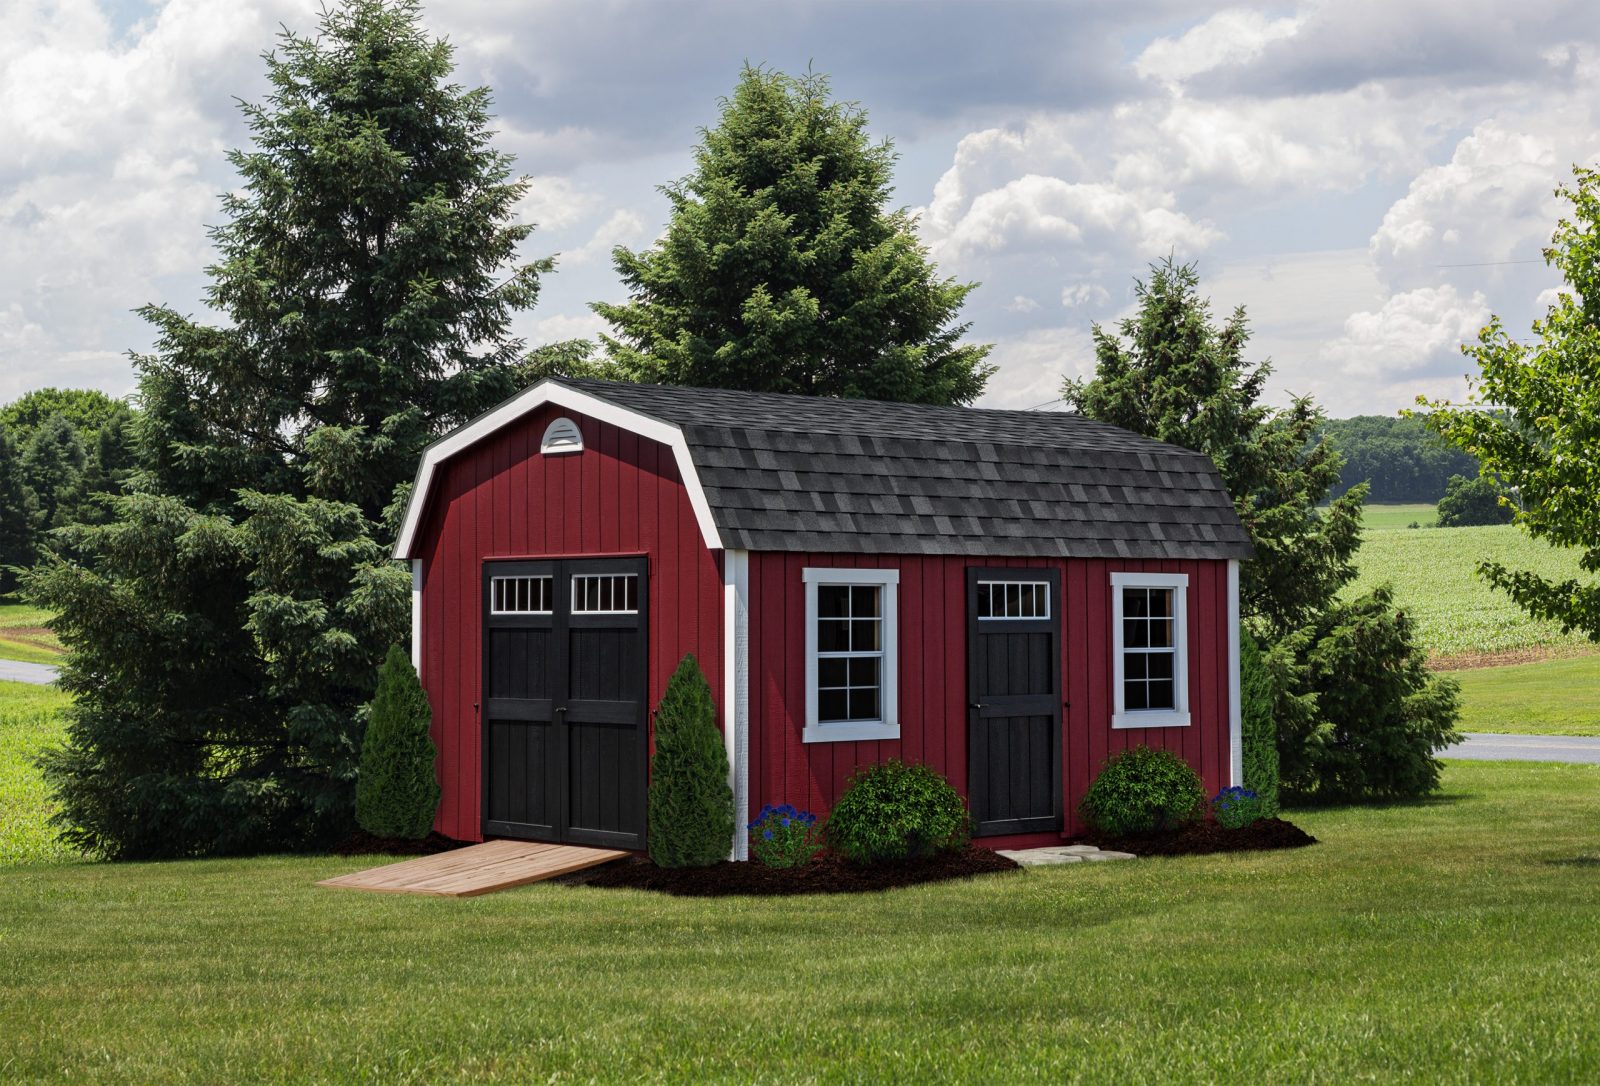 2020 model storage barn for sale in minneapolis, mn and